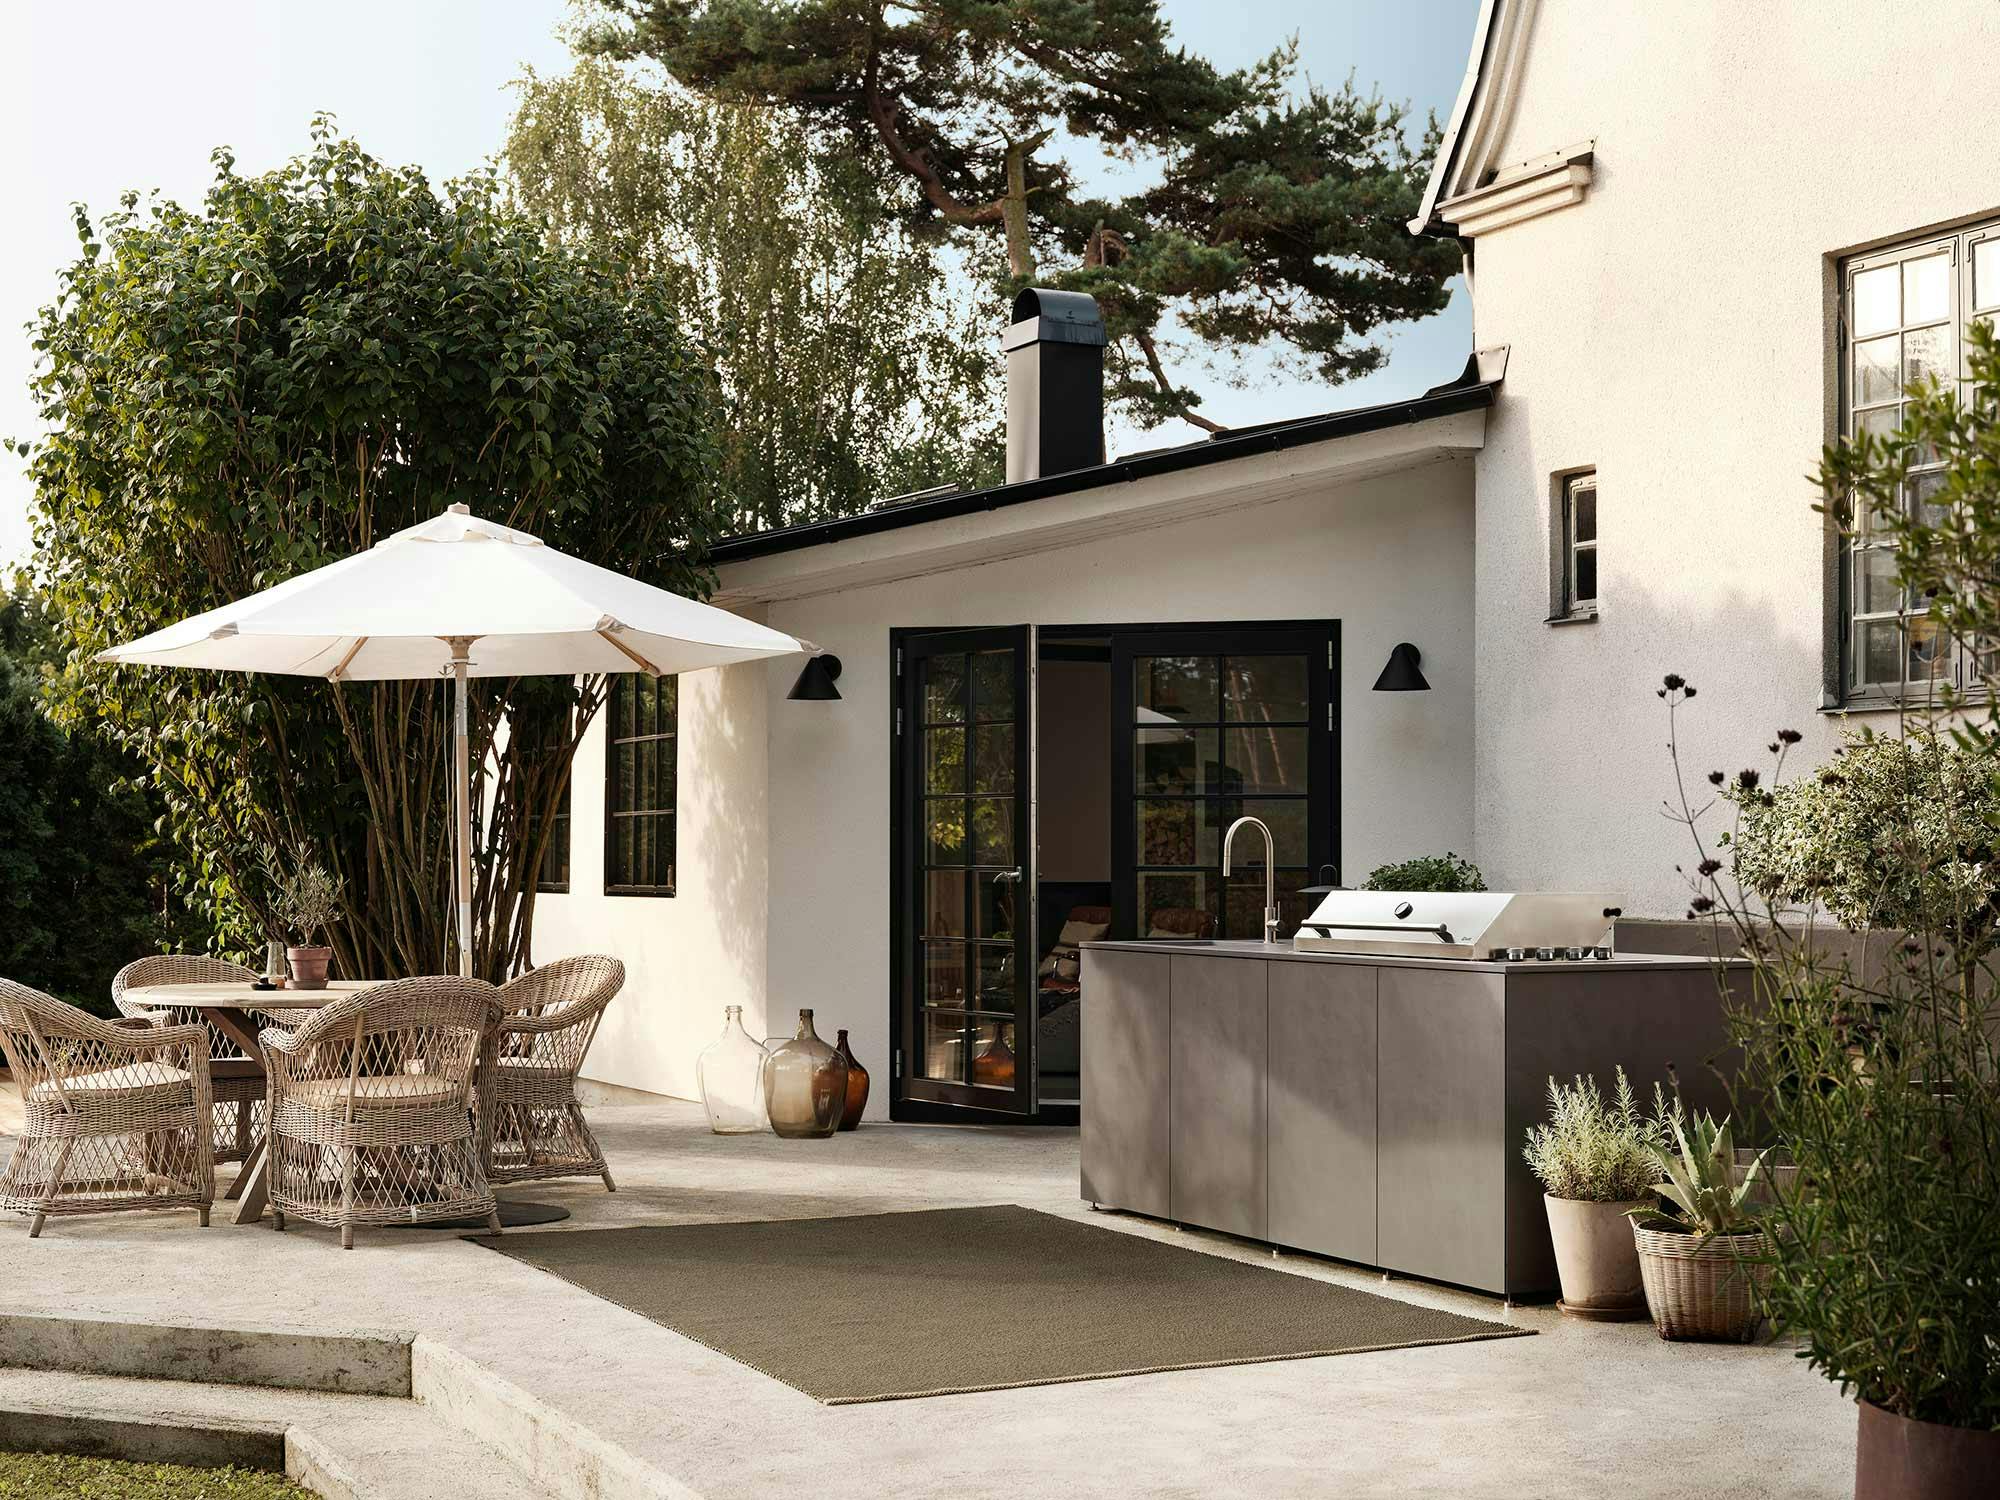 Numéro d'image 32 de la section actuelle de Cosentino and Ballingslöv AB in collaboration during Stockholm Design Week to launch a new outdoor kitchen de Cosentino France